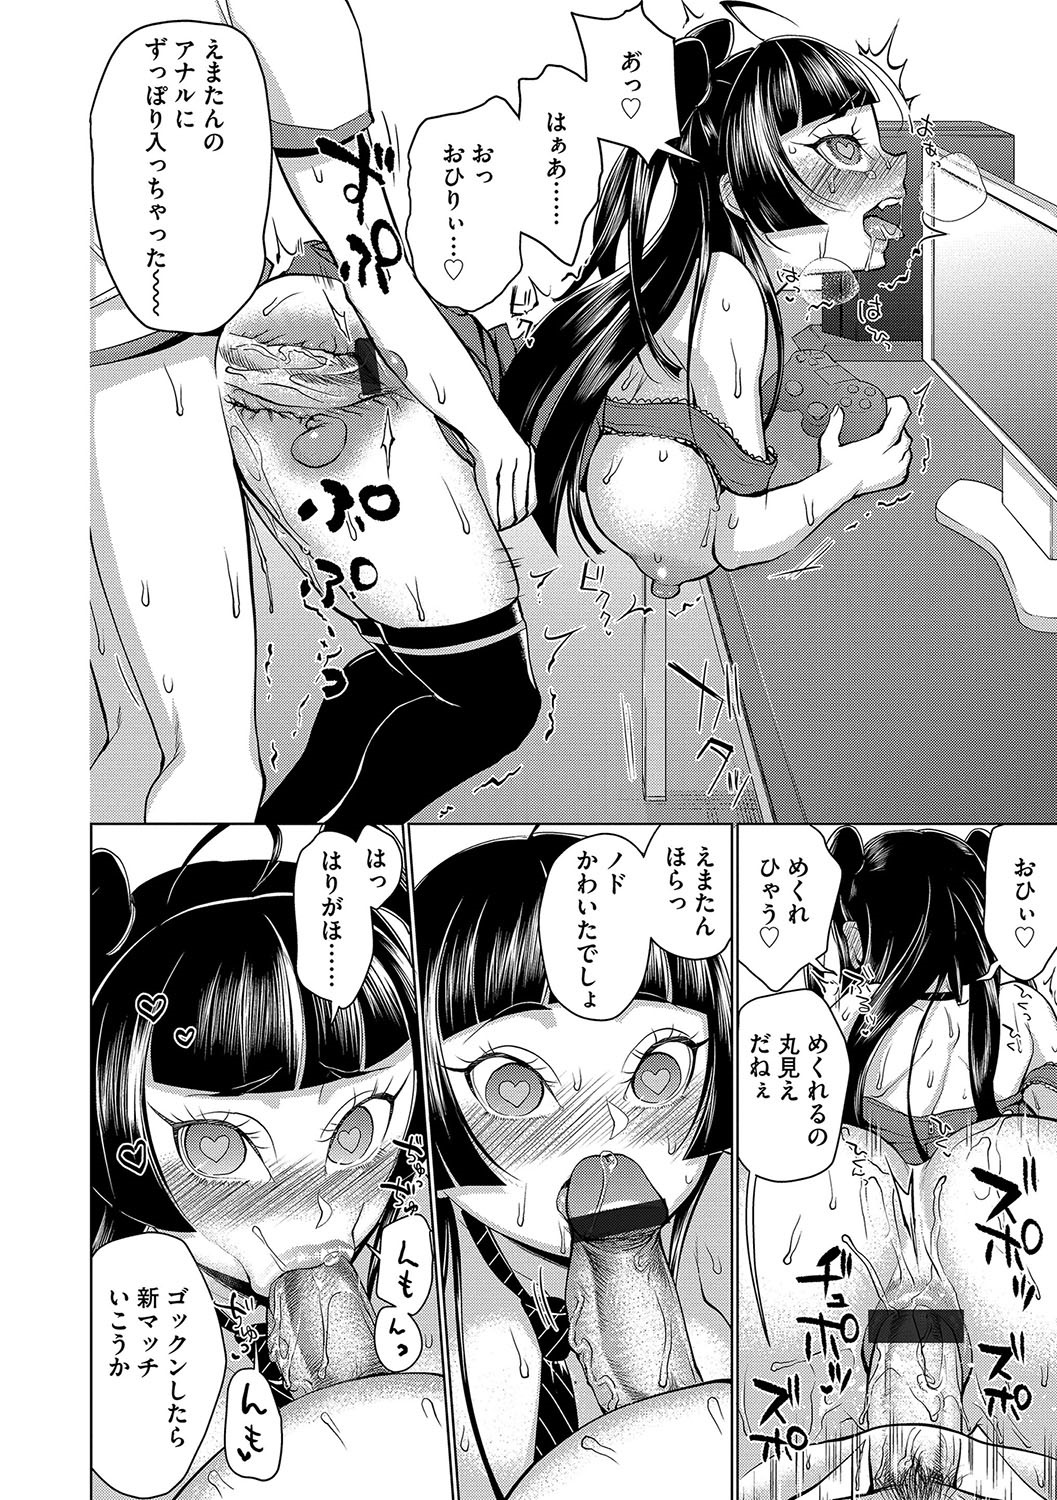 [Anthology] Cyberia Maniacs Saimin Choukyou Deluxe Vol. 006 [Digital] page 43 full